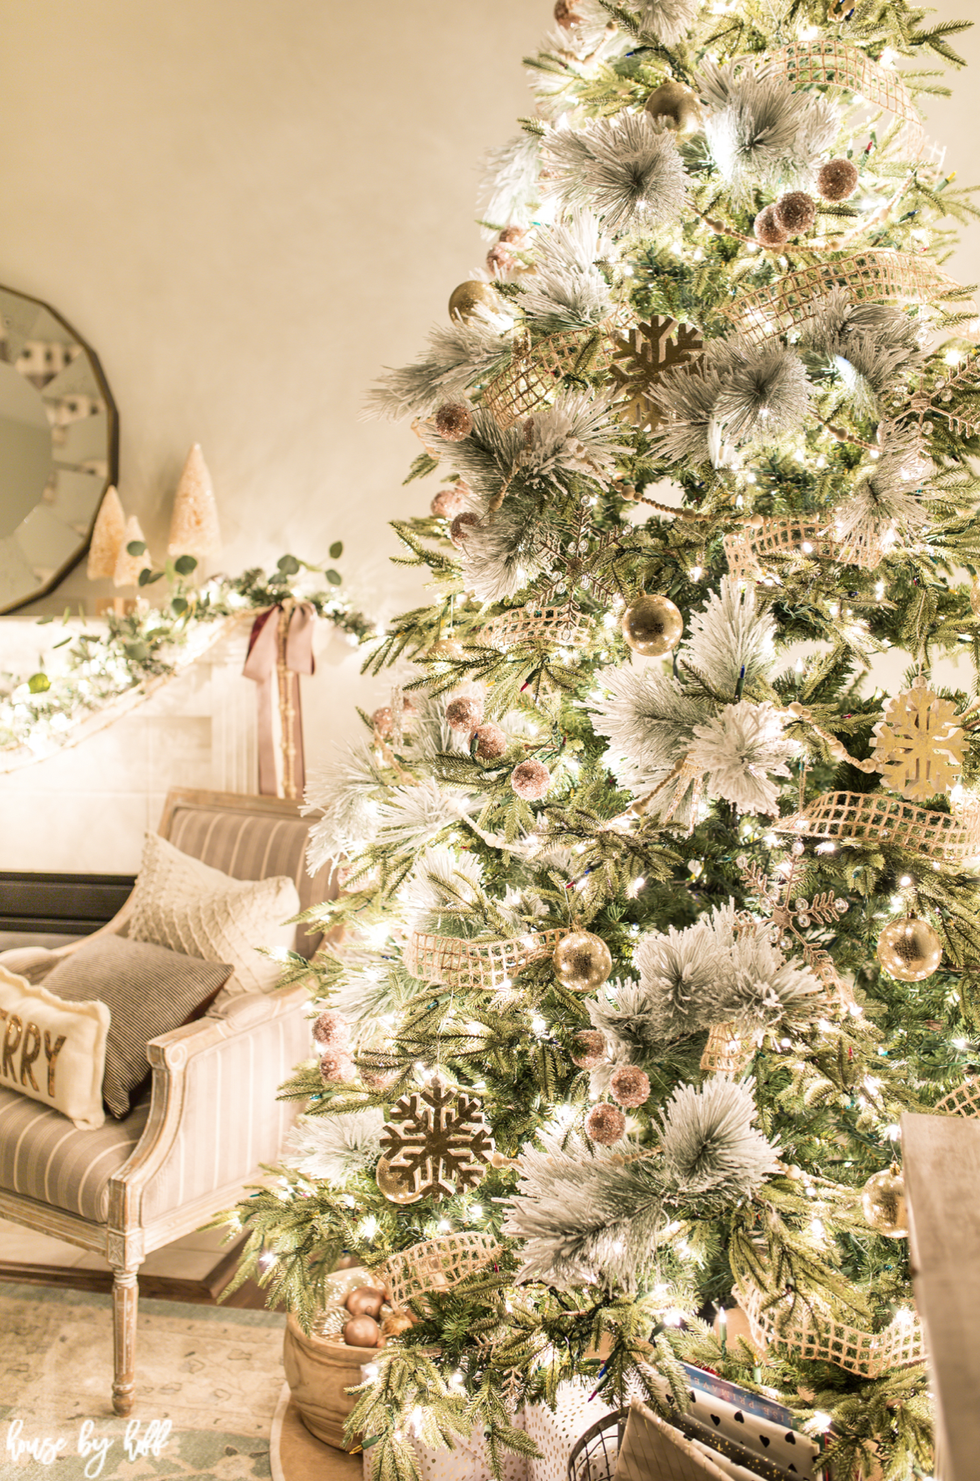 Vintage Christmas Decor: My Top Picks + How To Style It